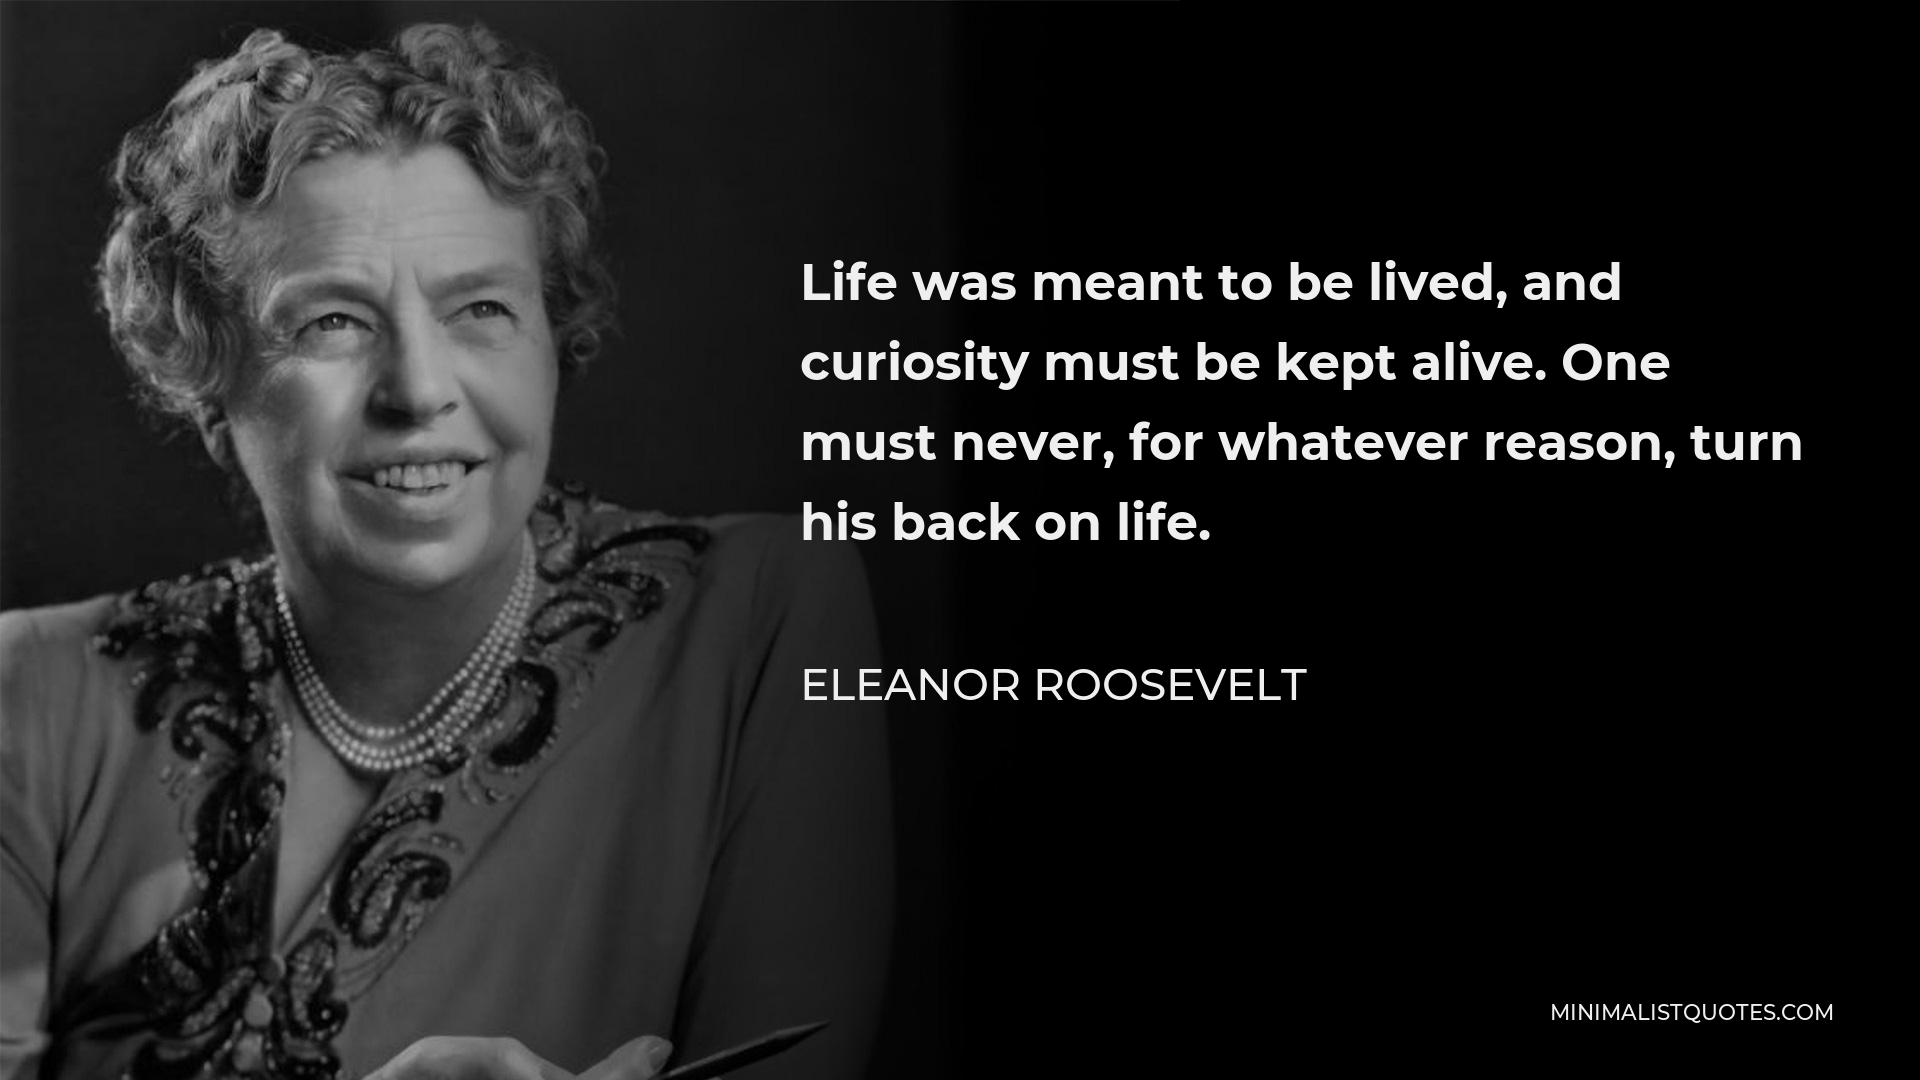 Eleanor Roosevelt Quote - Life was meant to be lived, and curiosity must be kept alive. One must never, for whatever reason, turn his back on life.